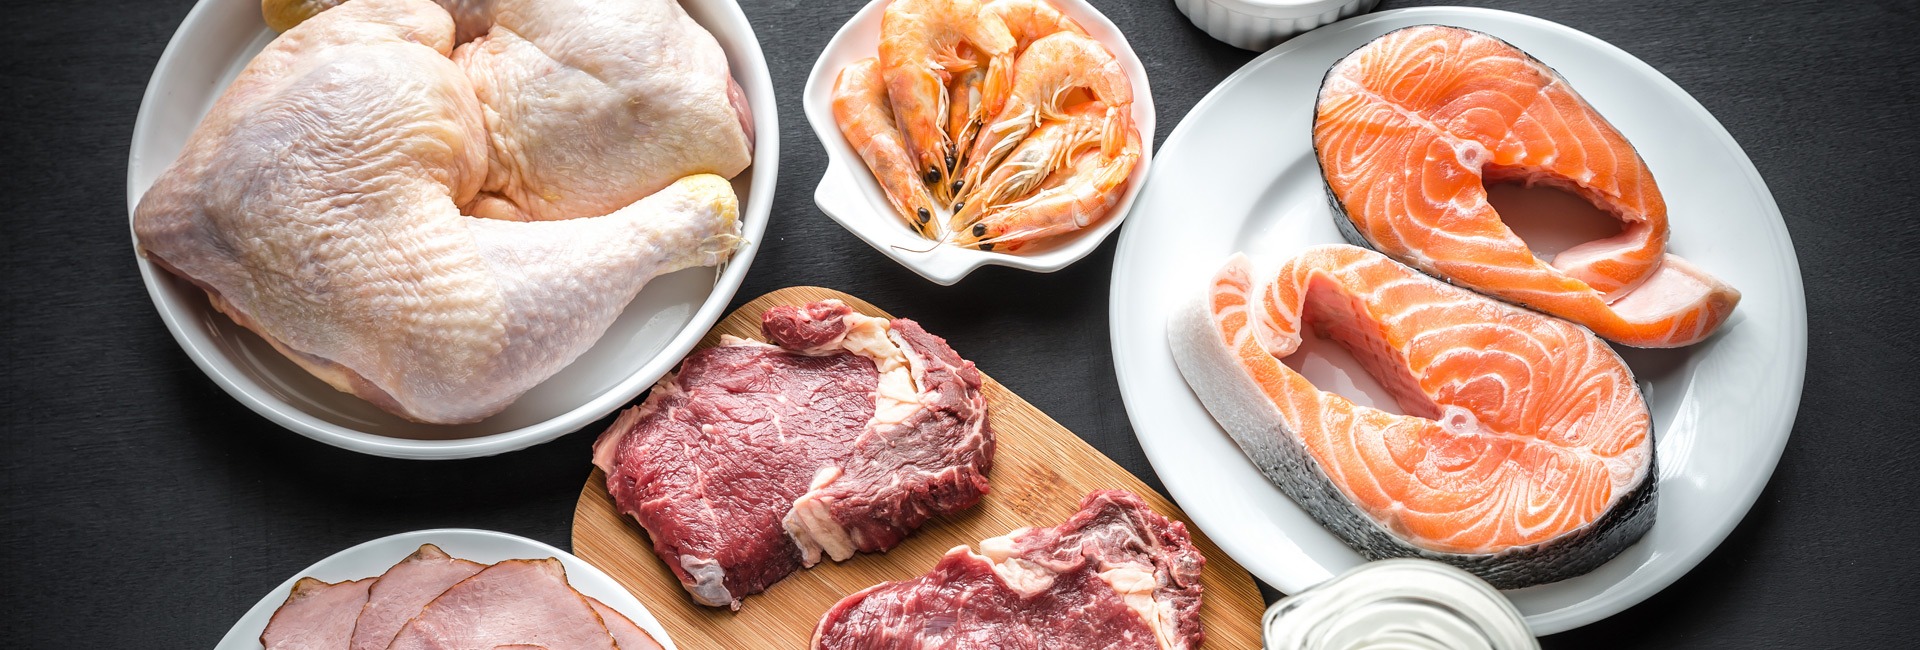 Meat, Poultry & Seafood Packaging